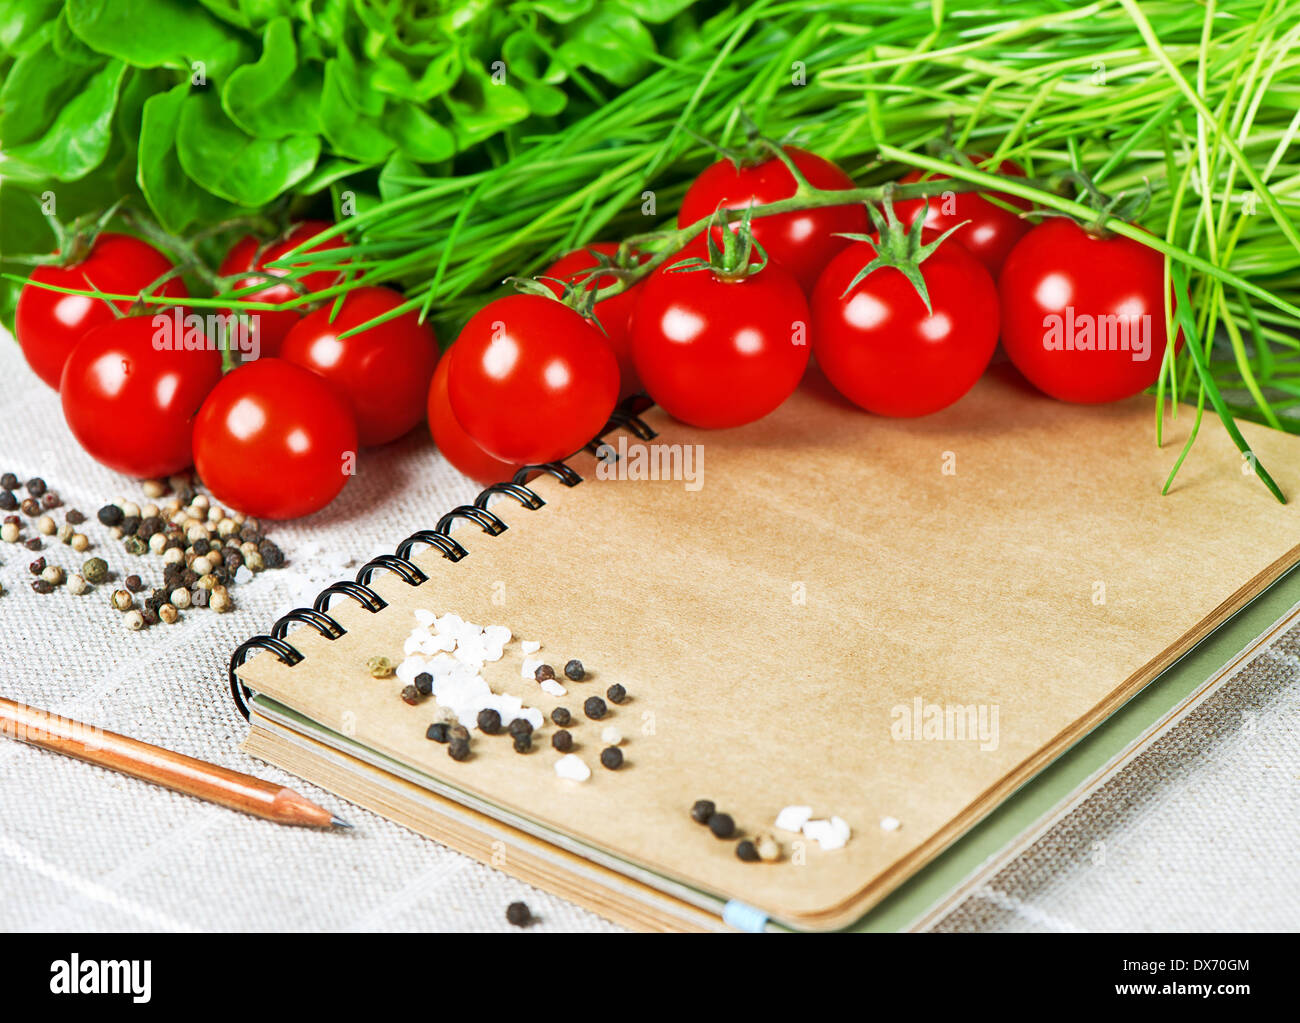 open recipe book with vegetables. tomatoes, chives and spices. healthy food Stock Photo